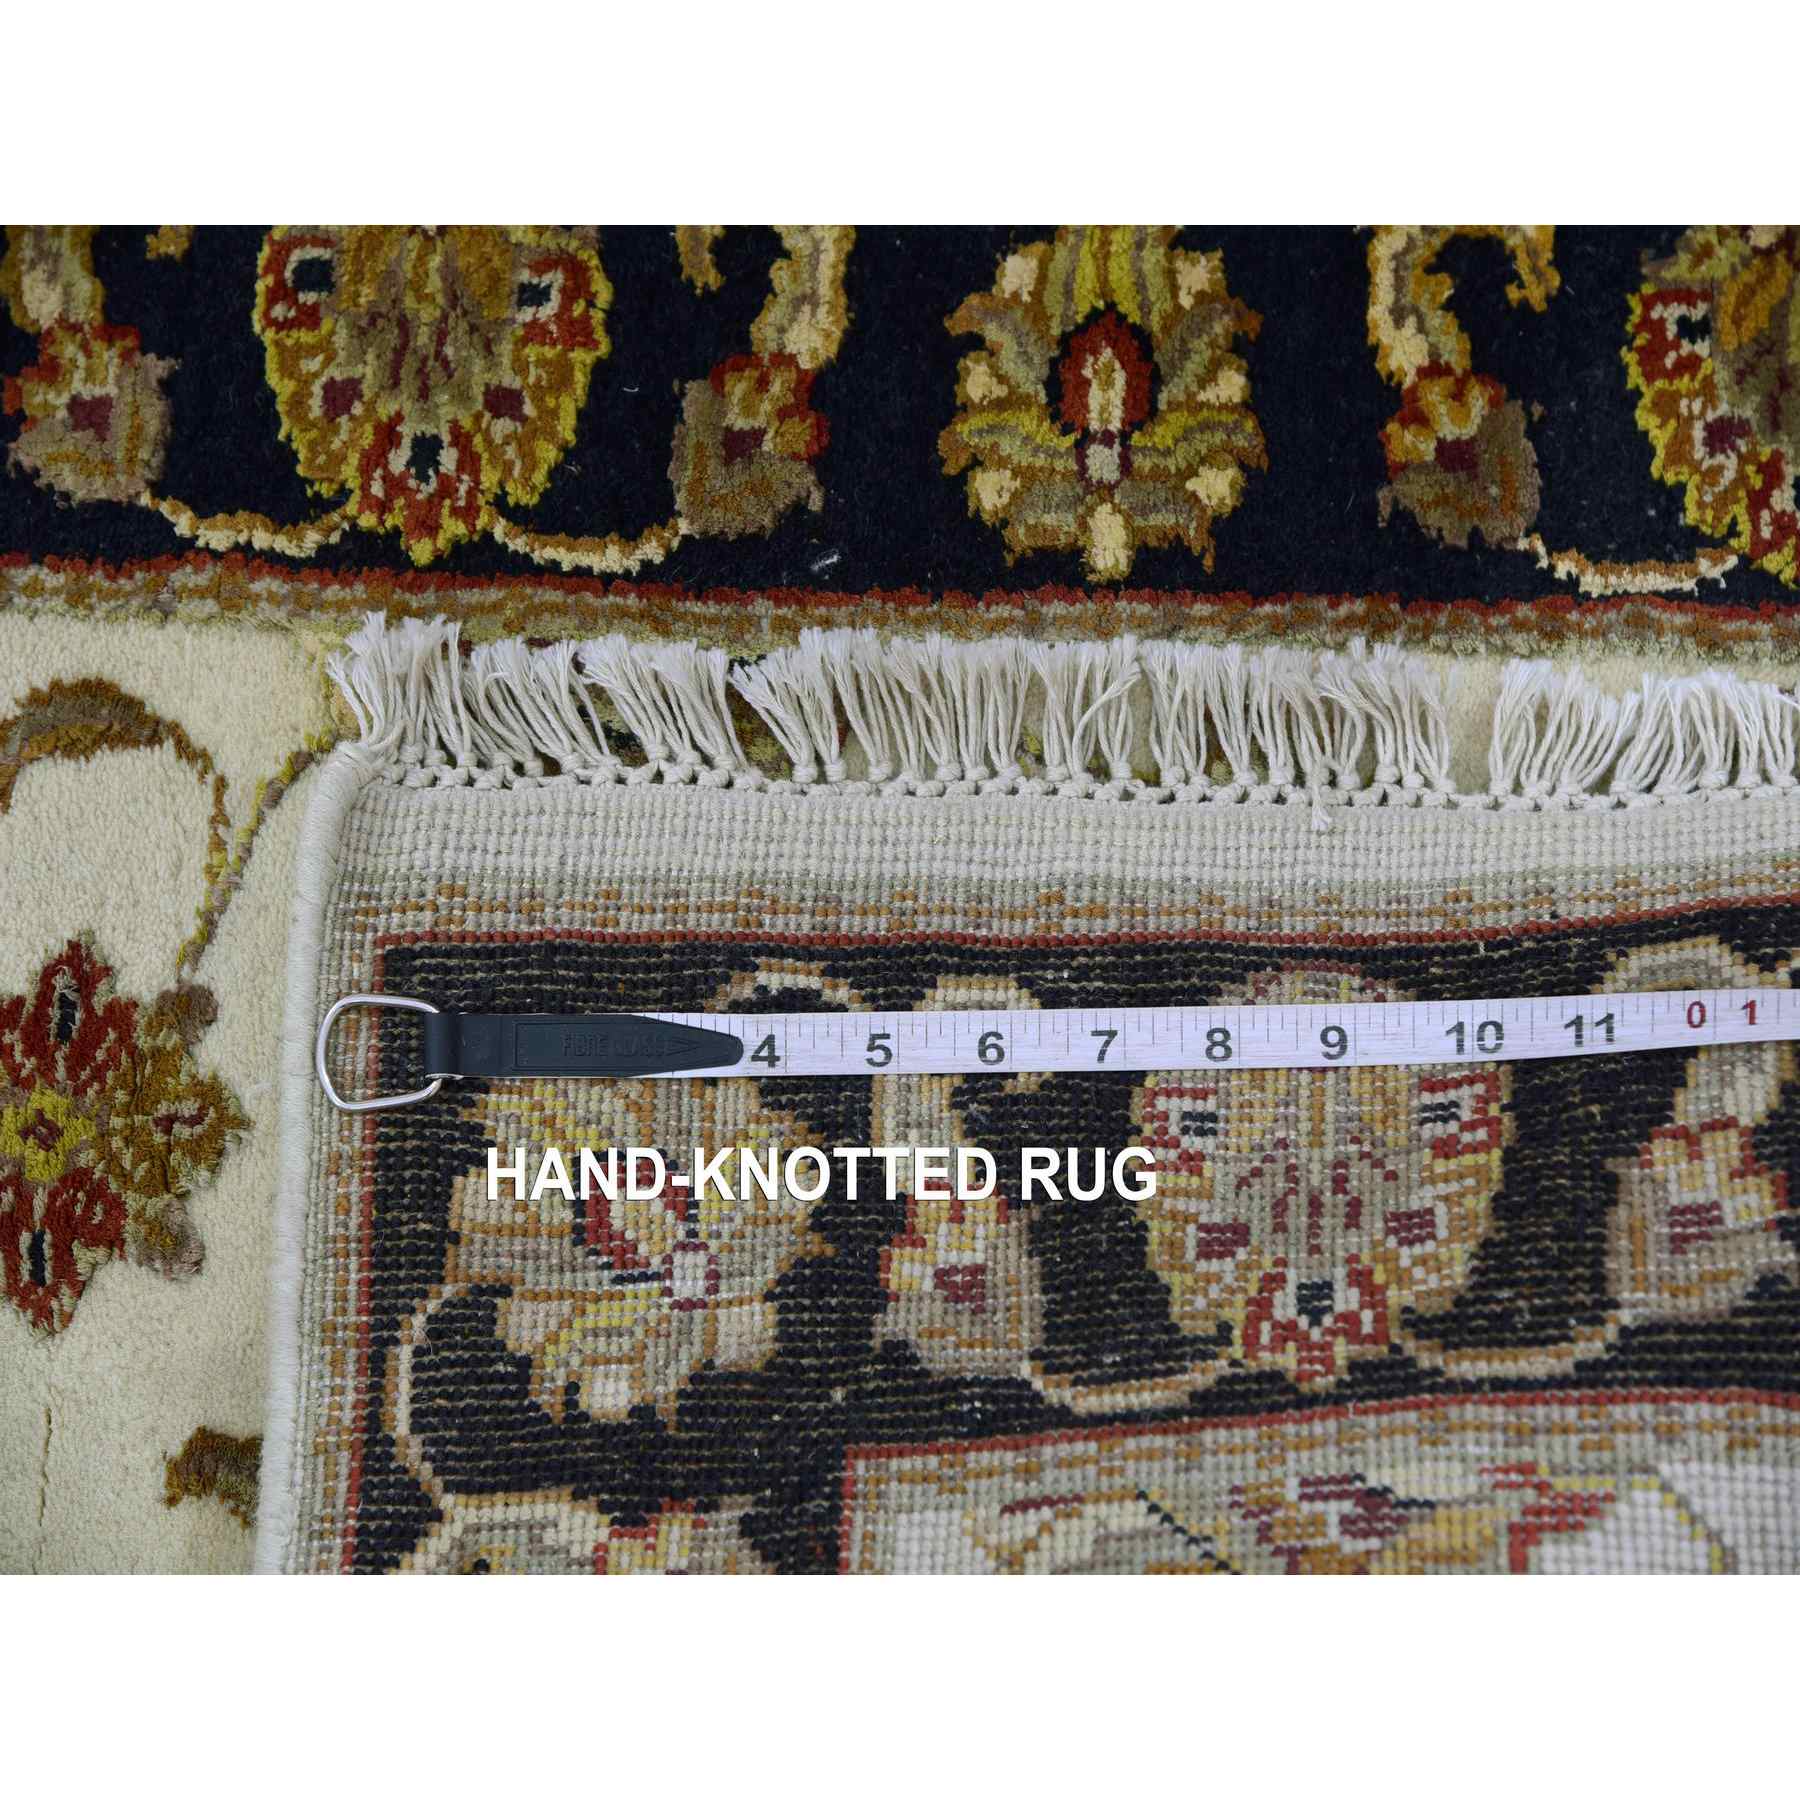 Rajasthan-Hand-Knotted-Rug-376970